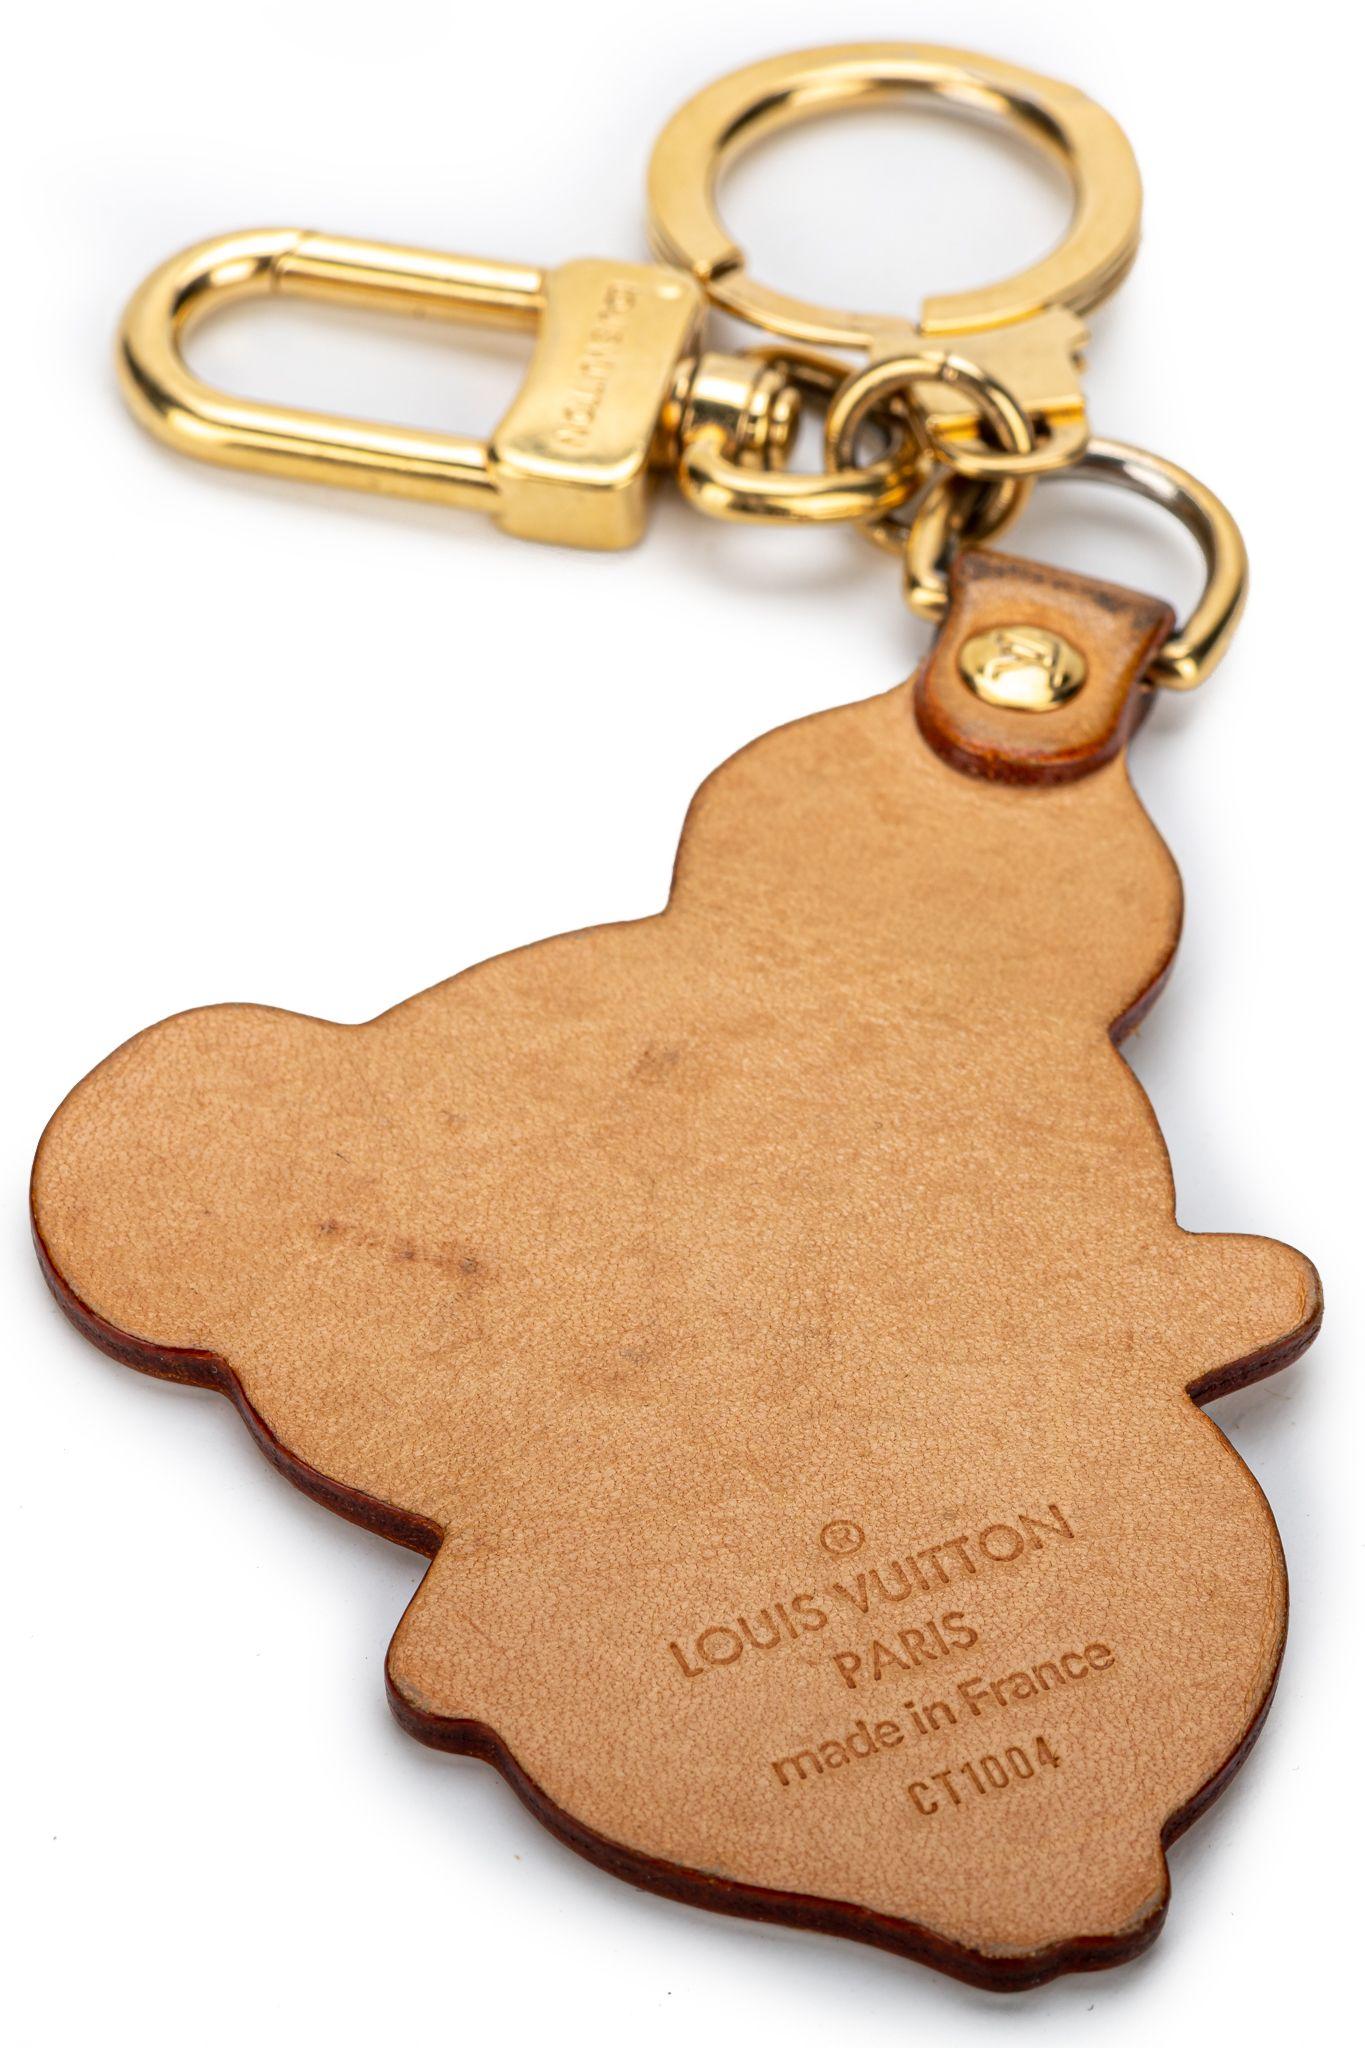 Louis Vuitton limited edition Murakami keychain/bag charm . Comes with original box.